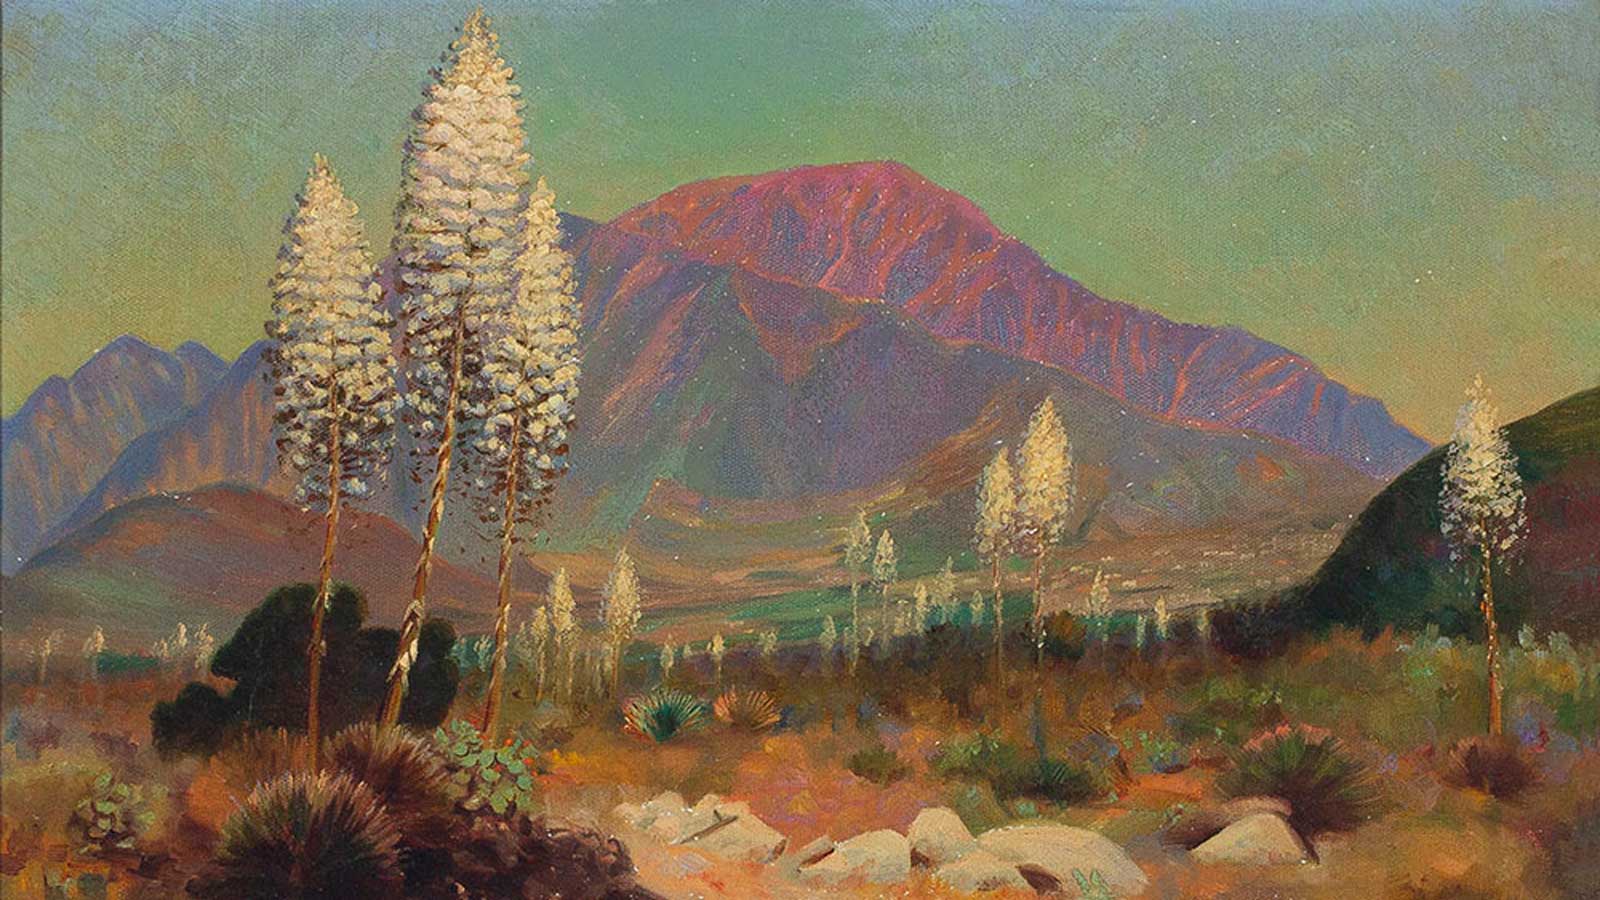 California art collection given new home at CSUCI